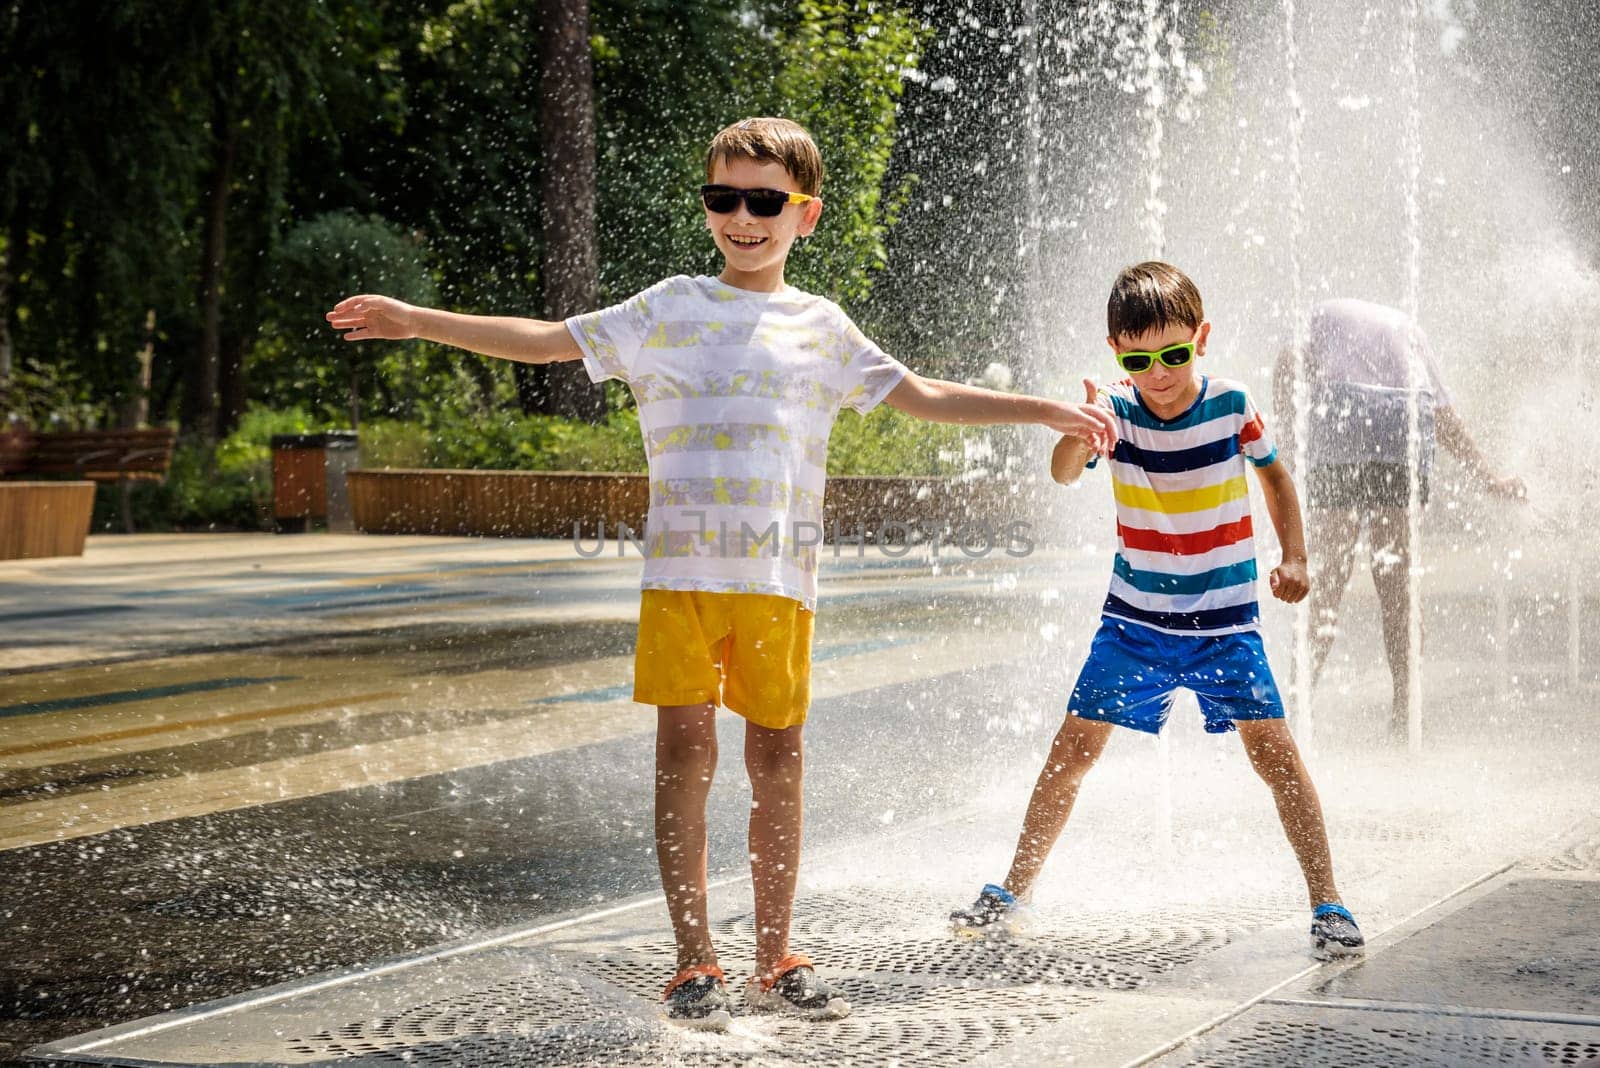 Boy having fun in water fountains. Child playing with a city fountain on hot summer day. Happy kids having fun in fountain. Summer weather. Active leisure, lifestyle and vacation by Kobysh